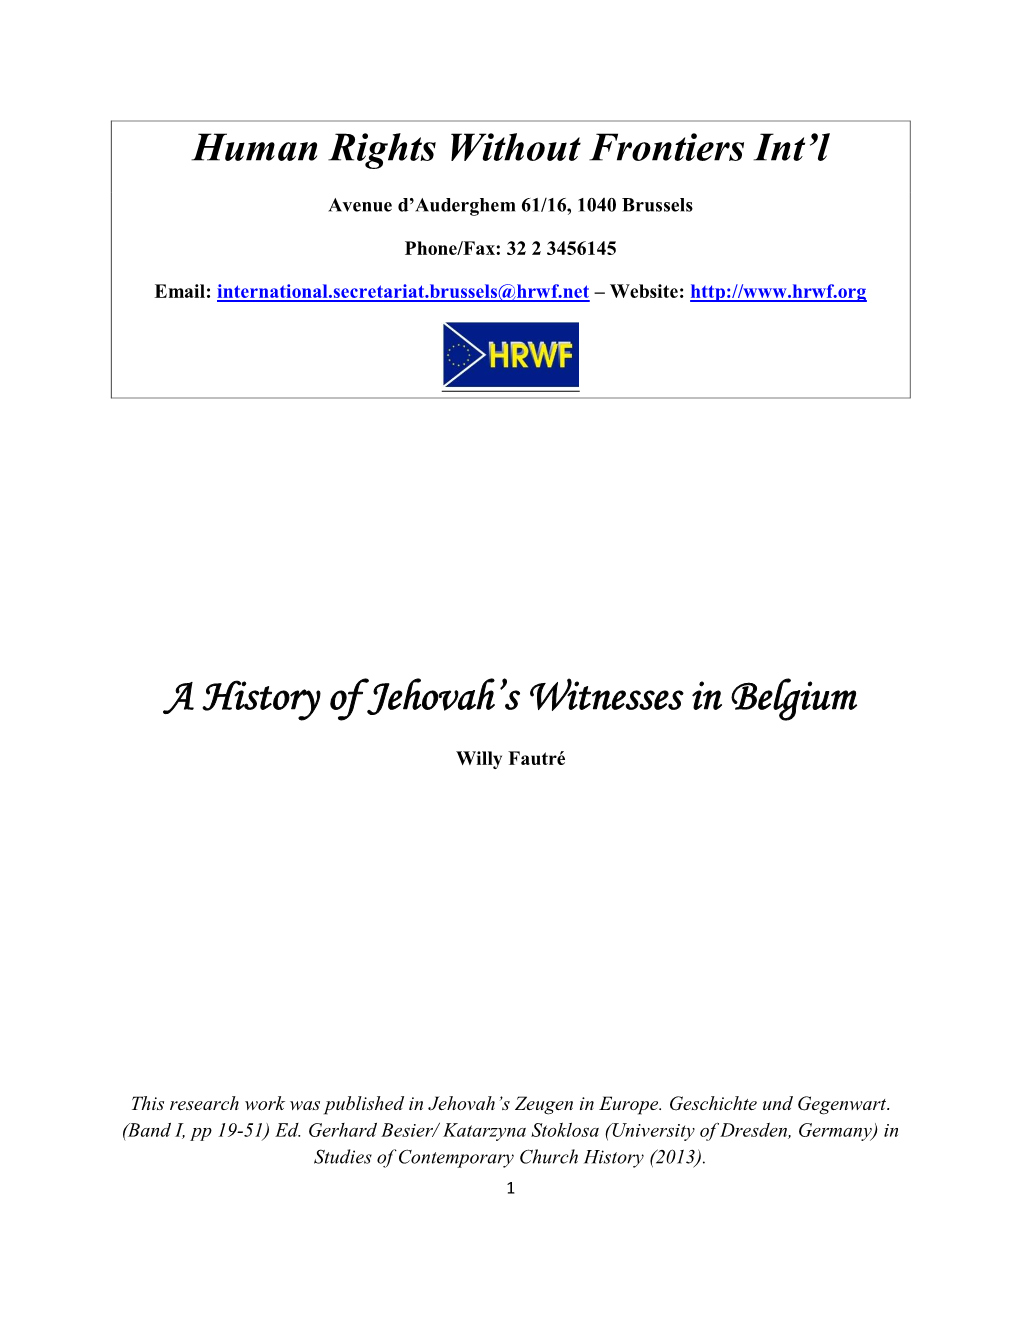 A History of Jehovah's Witnesses in Belgium